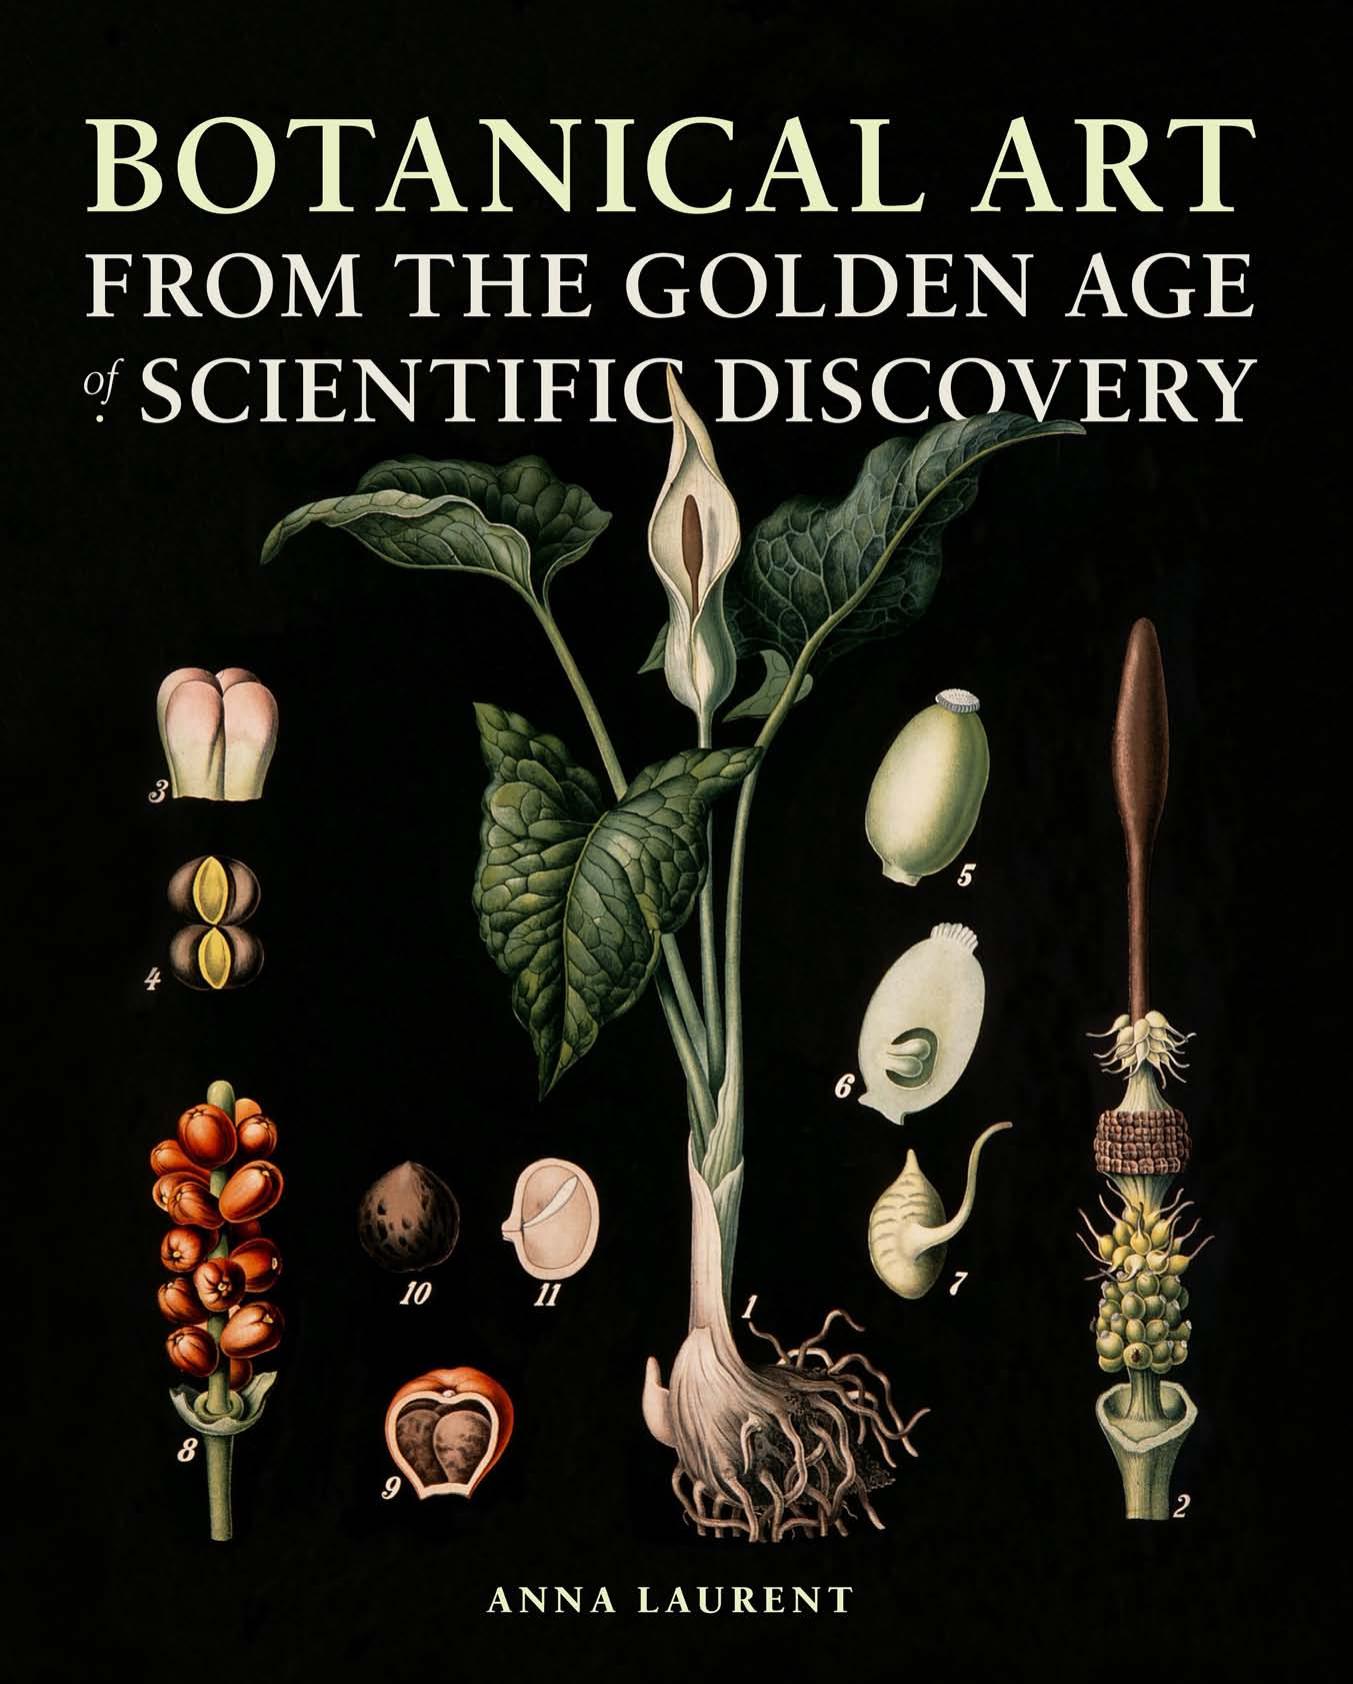 Botanical Art from the Golden Age of Scientific Discovery by Anna Laurent